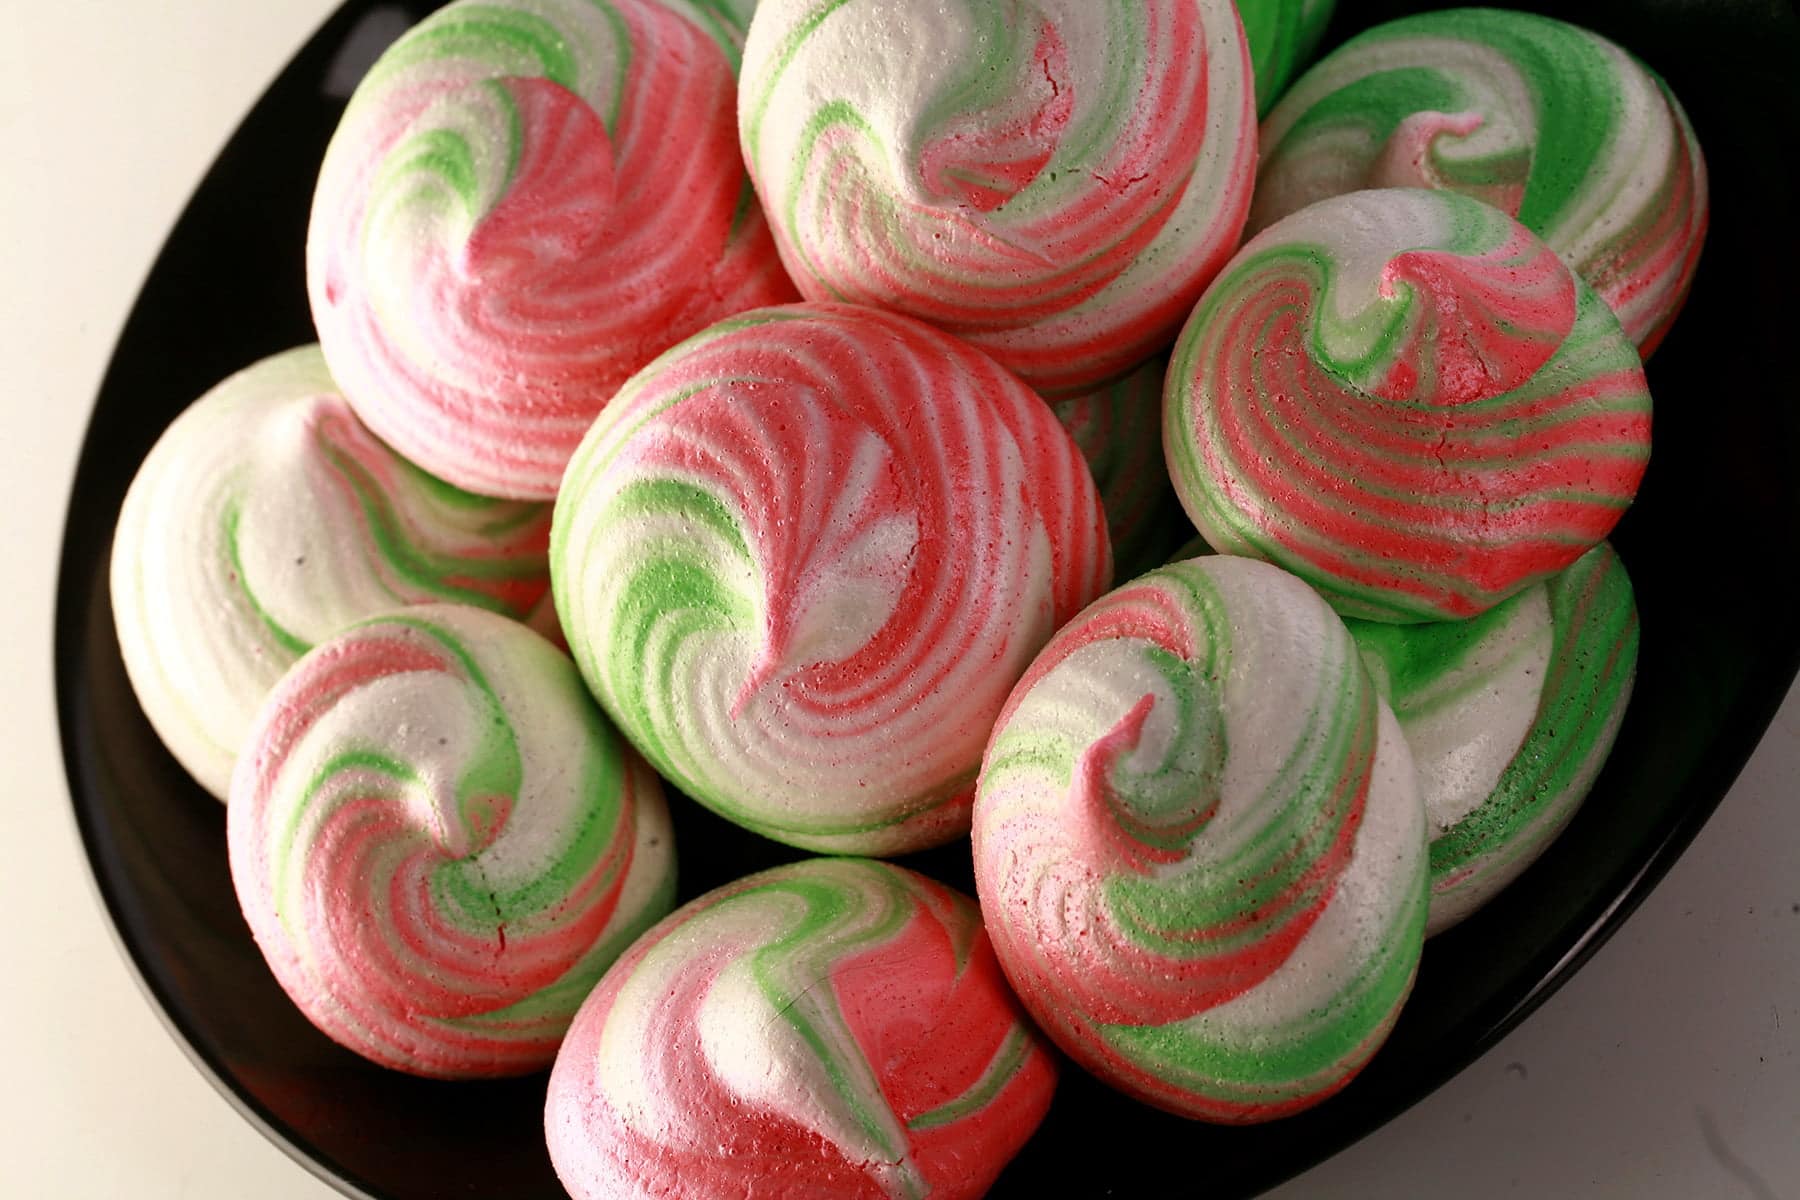 A plate of swirled meringue cookies in shades of pink, white, and green.